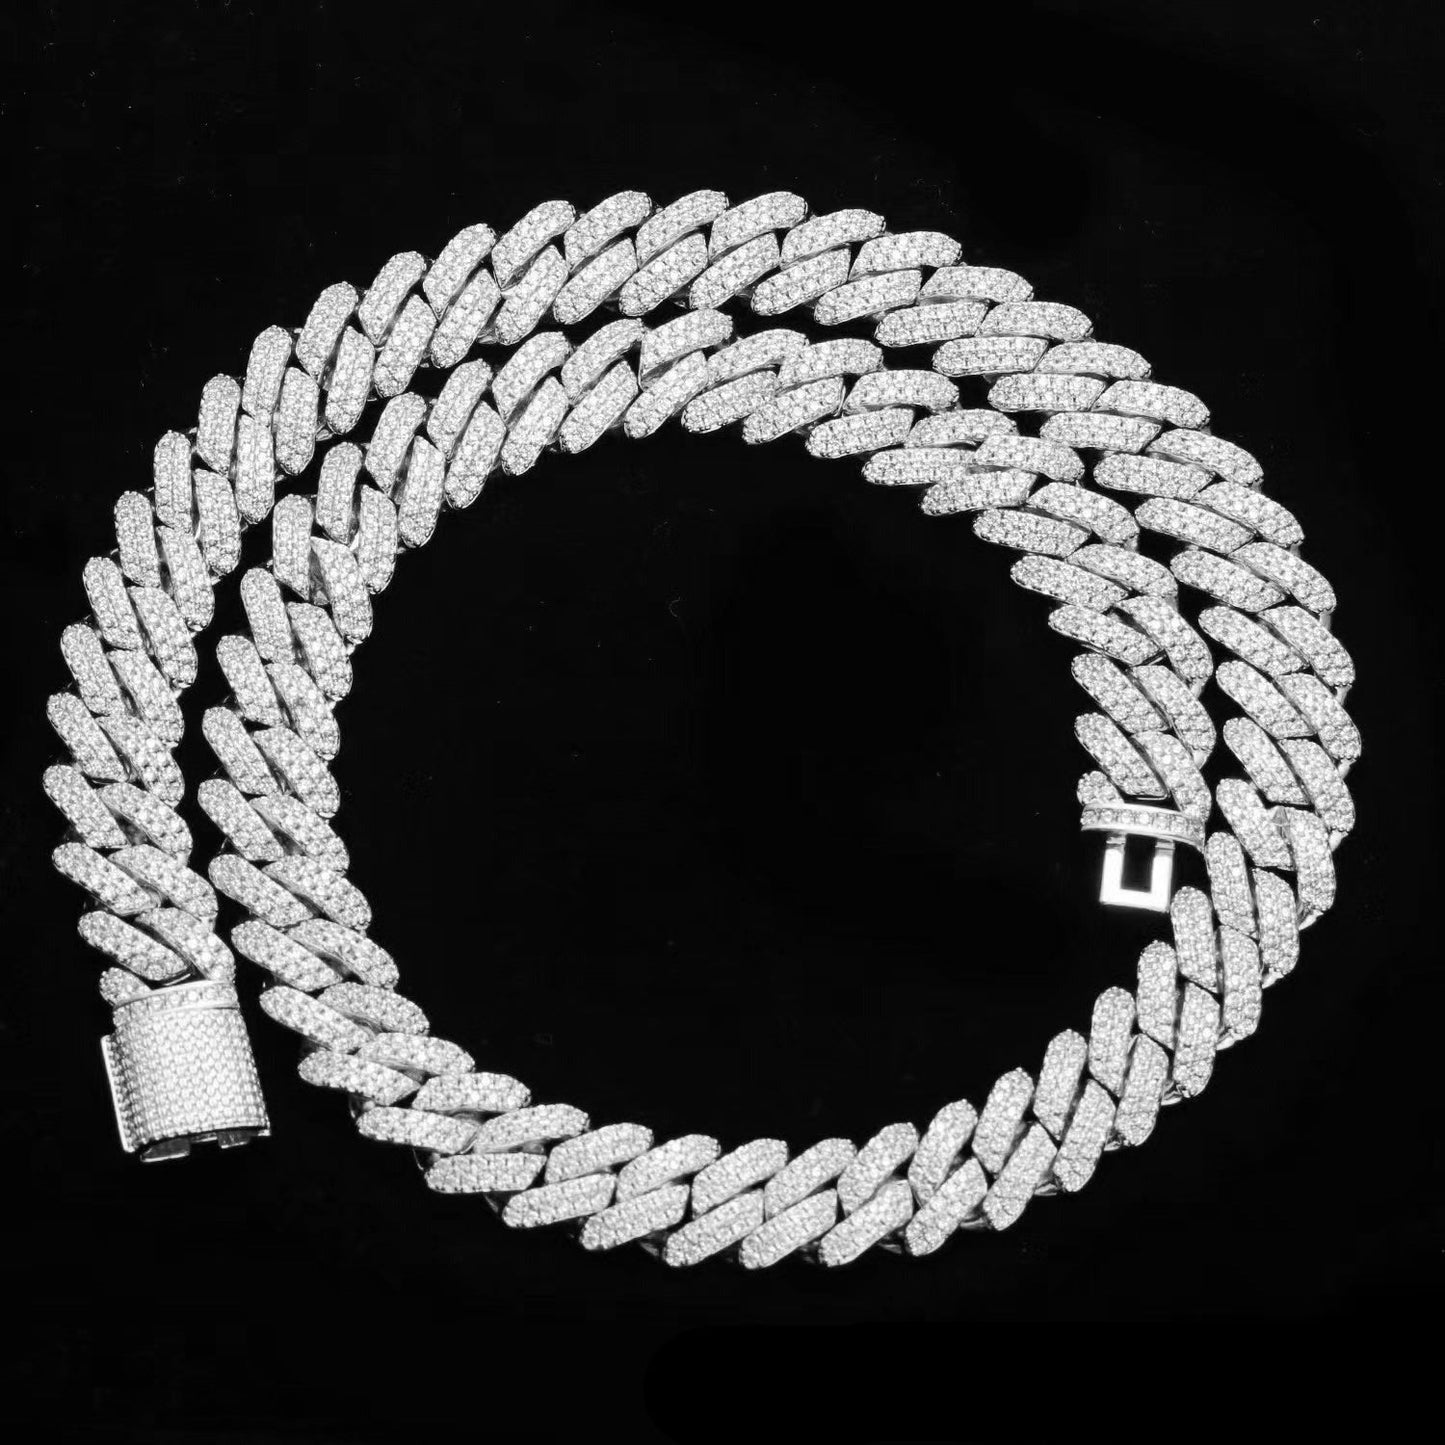 12mm Iced Diamond Prong Link Cuban Choker Chain in White GoldBest Seller Attention!
Bling Proud luxurious Iced Out Diamond Prong Link Cuban Choker features an impeccable quality. VVS diamonds that shine from all angles which tNecklacesNecklacesdopeplusDOPEPLUS.COM